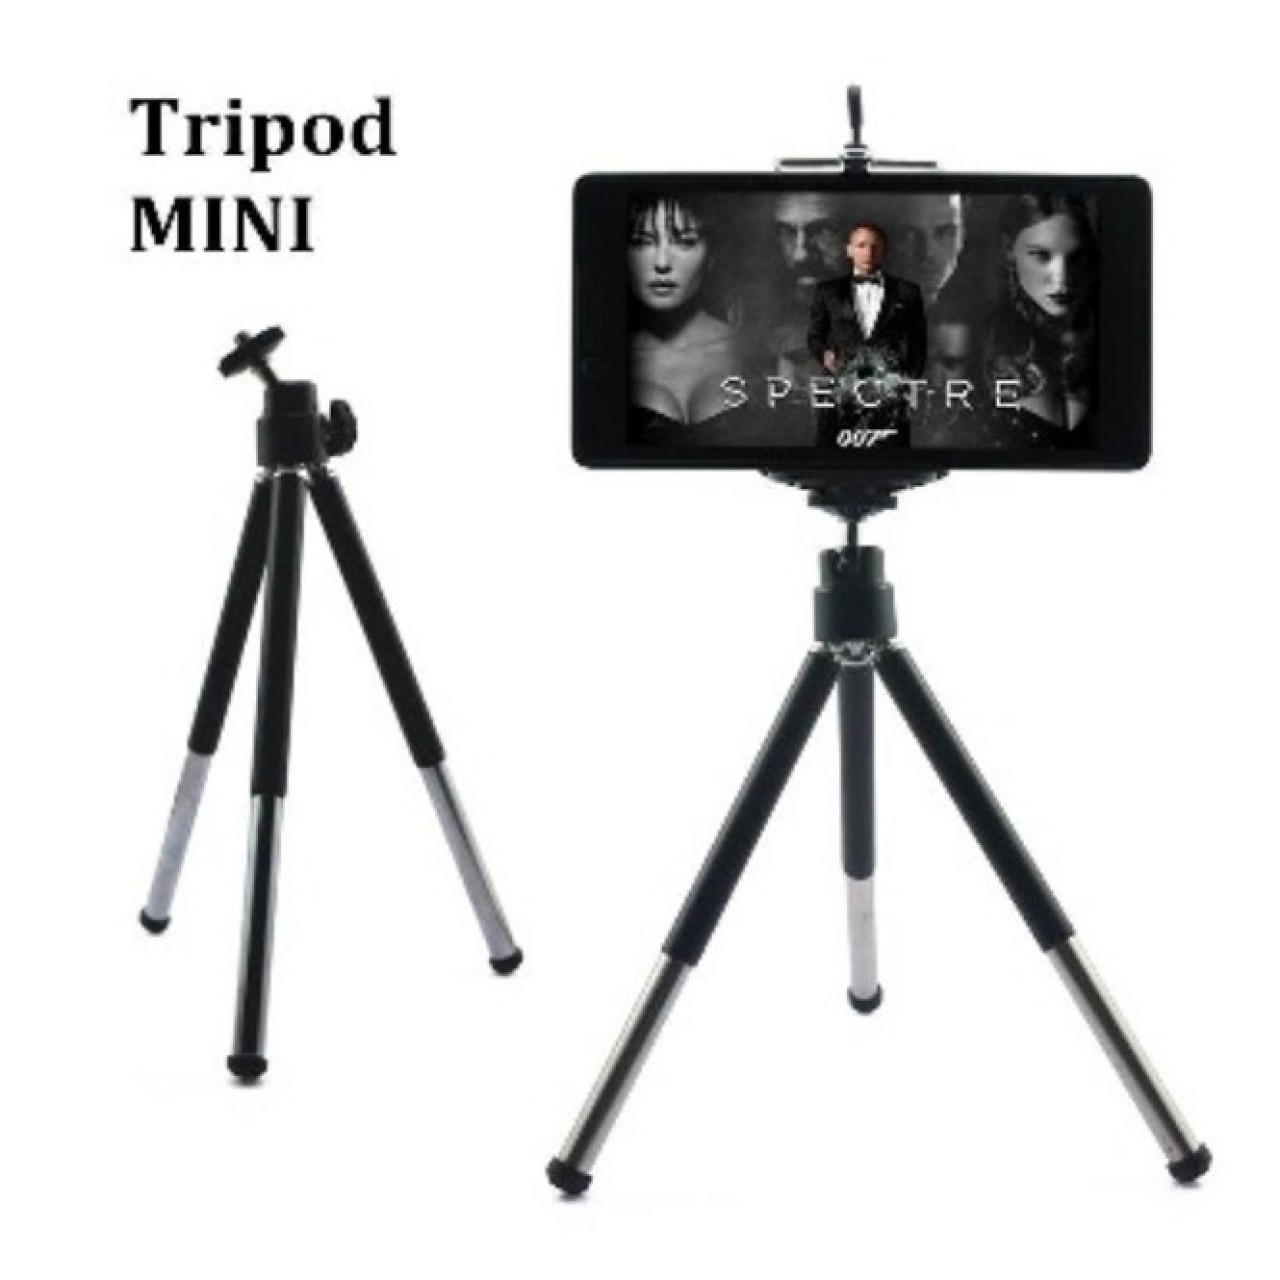 10 INCH METAL TRIPOD FOR MOBILES & POCKET DIGITAL CAMERA WITH EXTENDABLE LEGS & BALL TILT HEAD